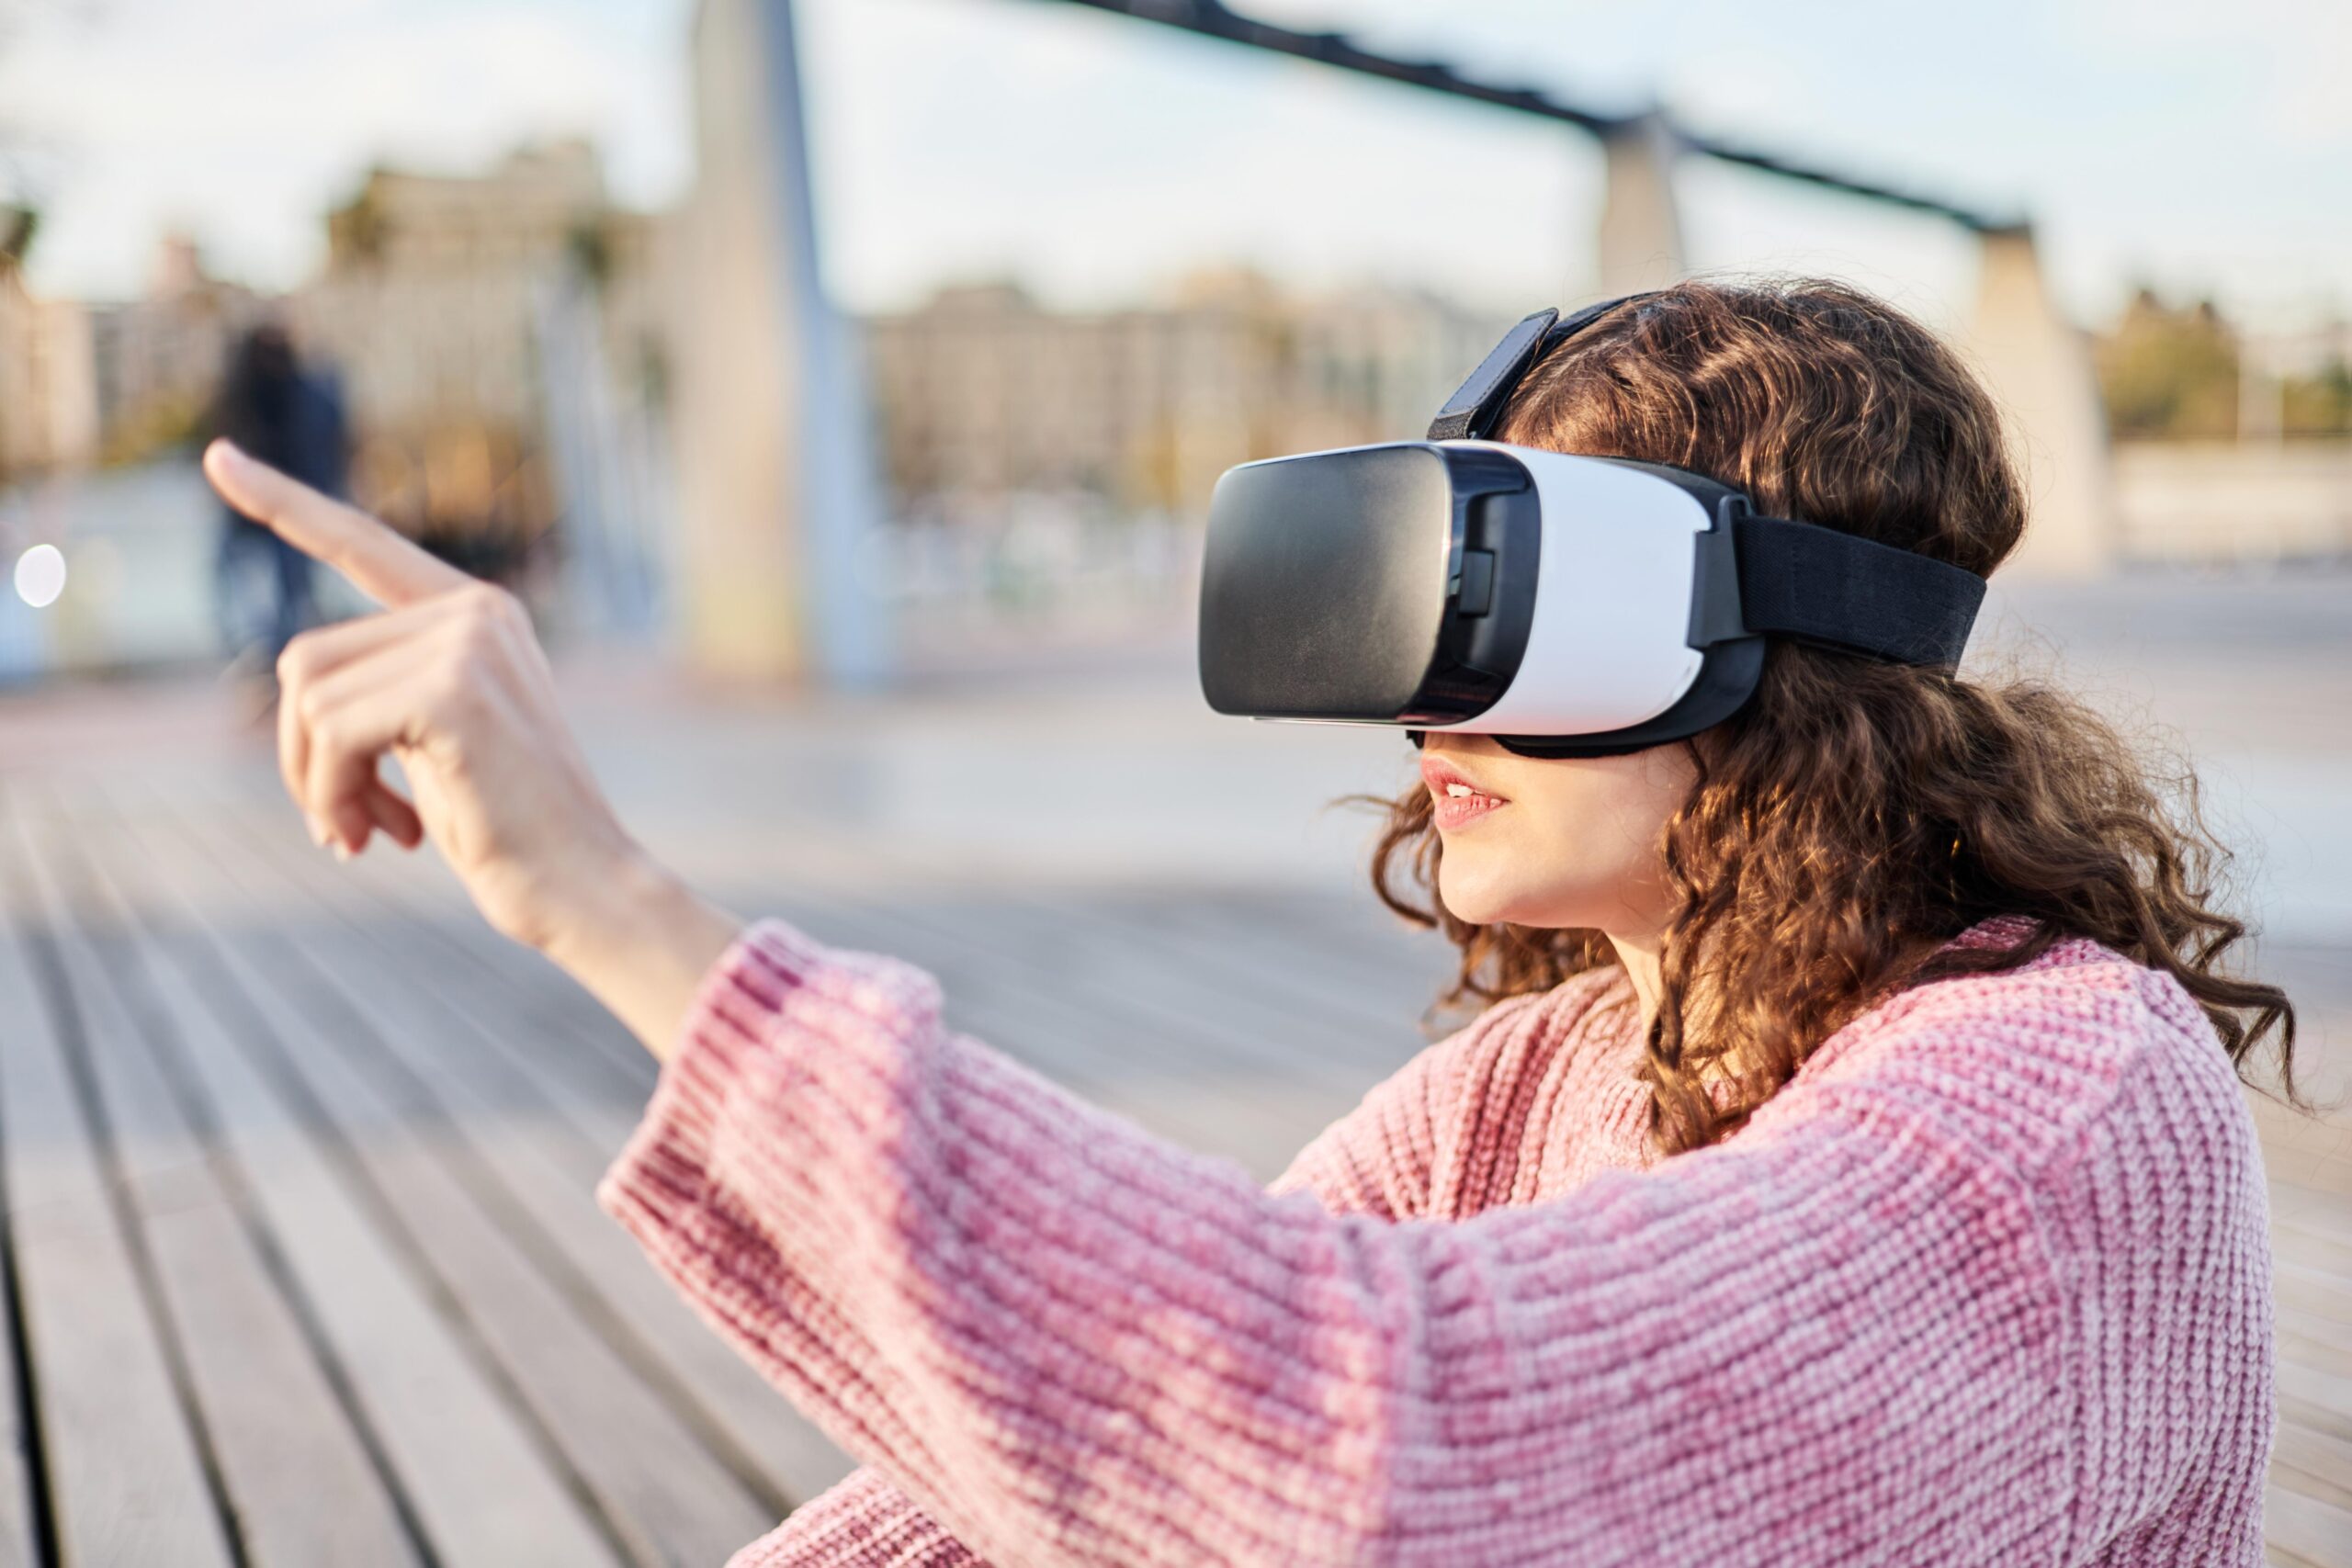 A young woman reaches out to a virtual object while wearing a VR headset outdoors